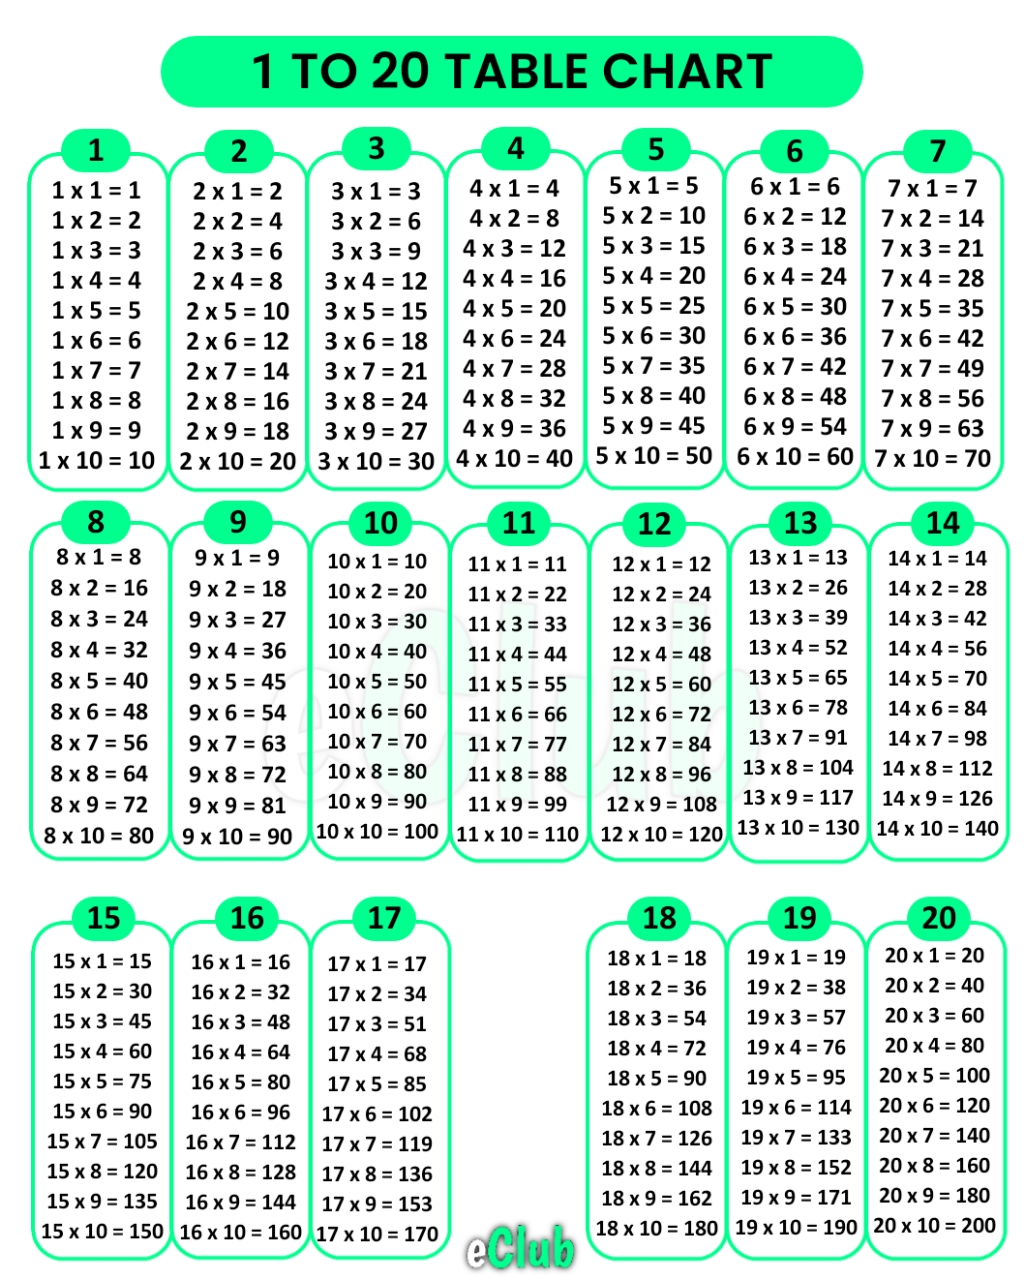 1 to 20 Table Chart